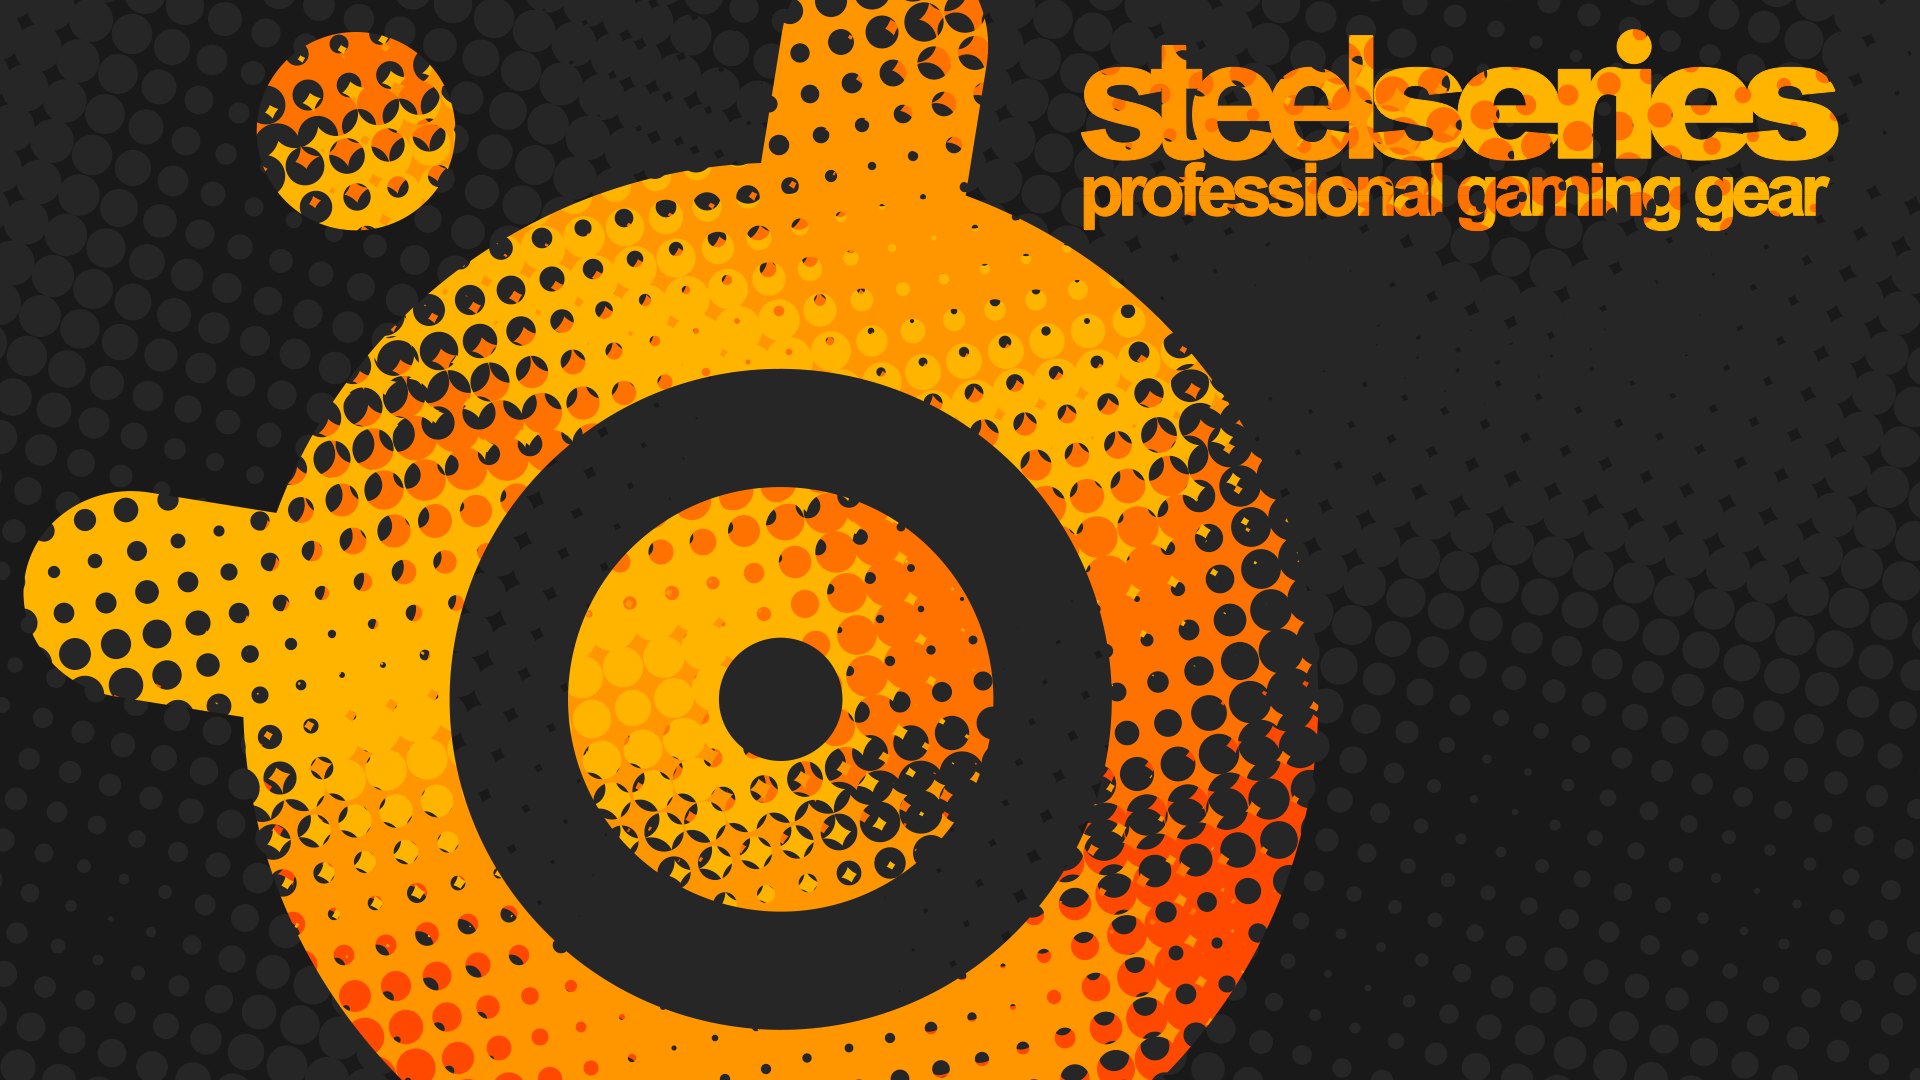 Steelseries Wallpapers - Collection on Behance